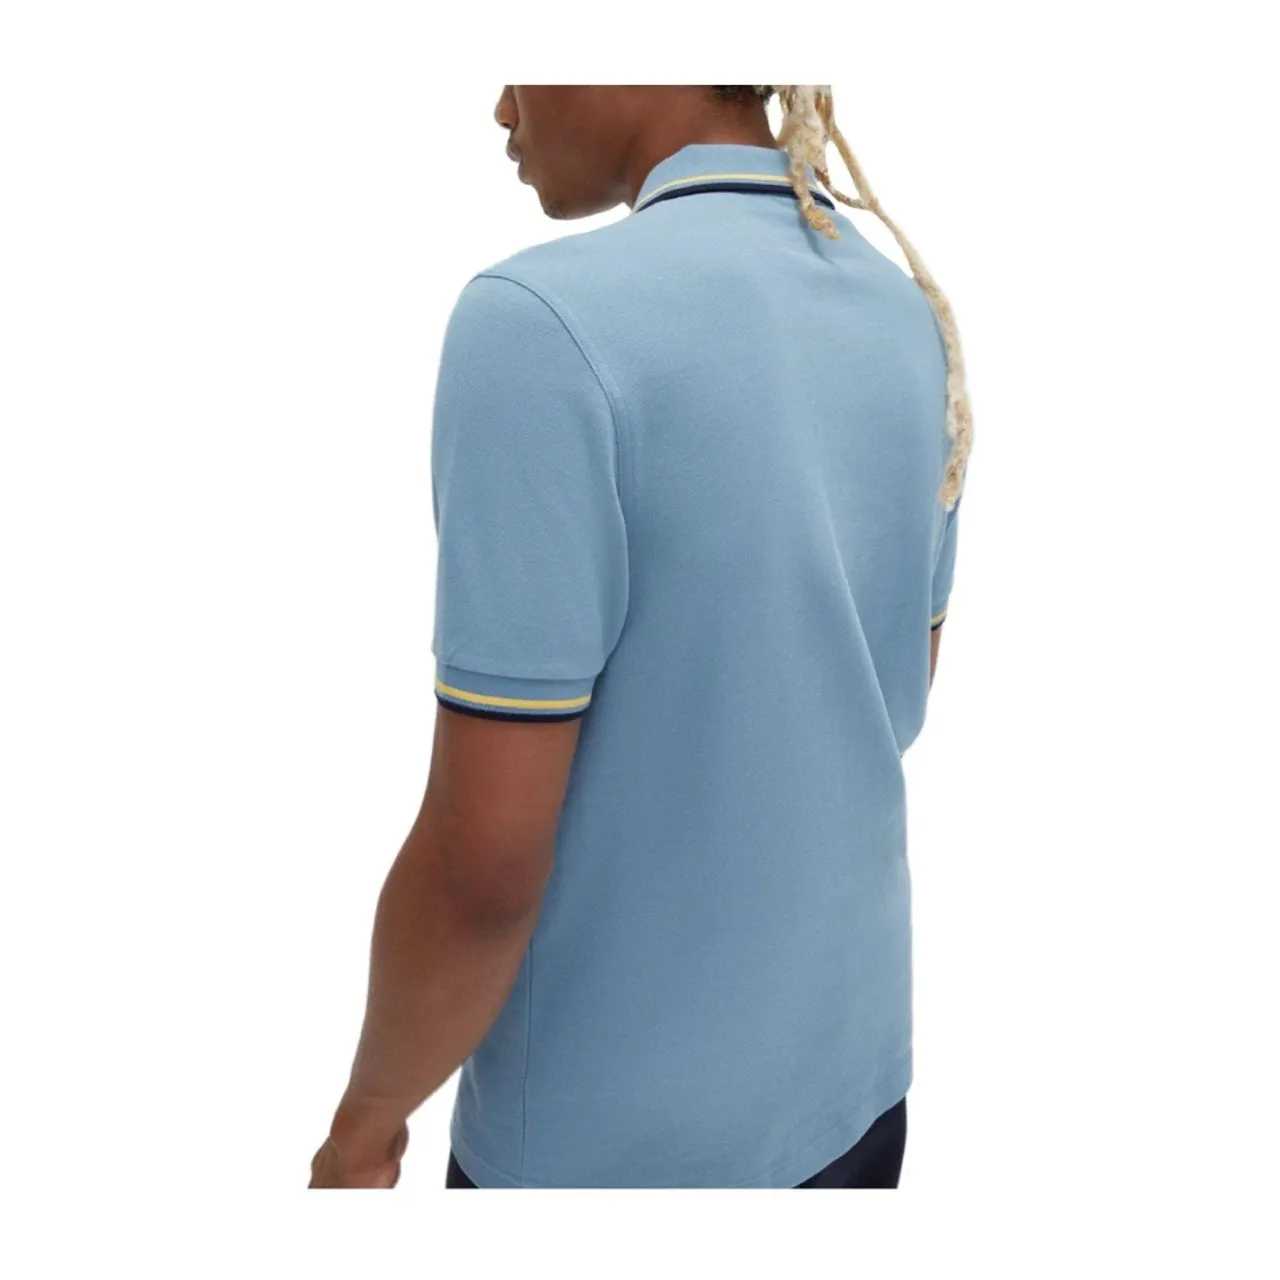 Modernes Slim Fit Piqué Polo Fred Perry